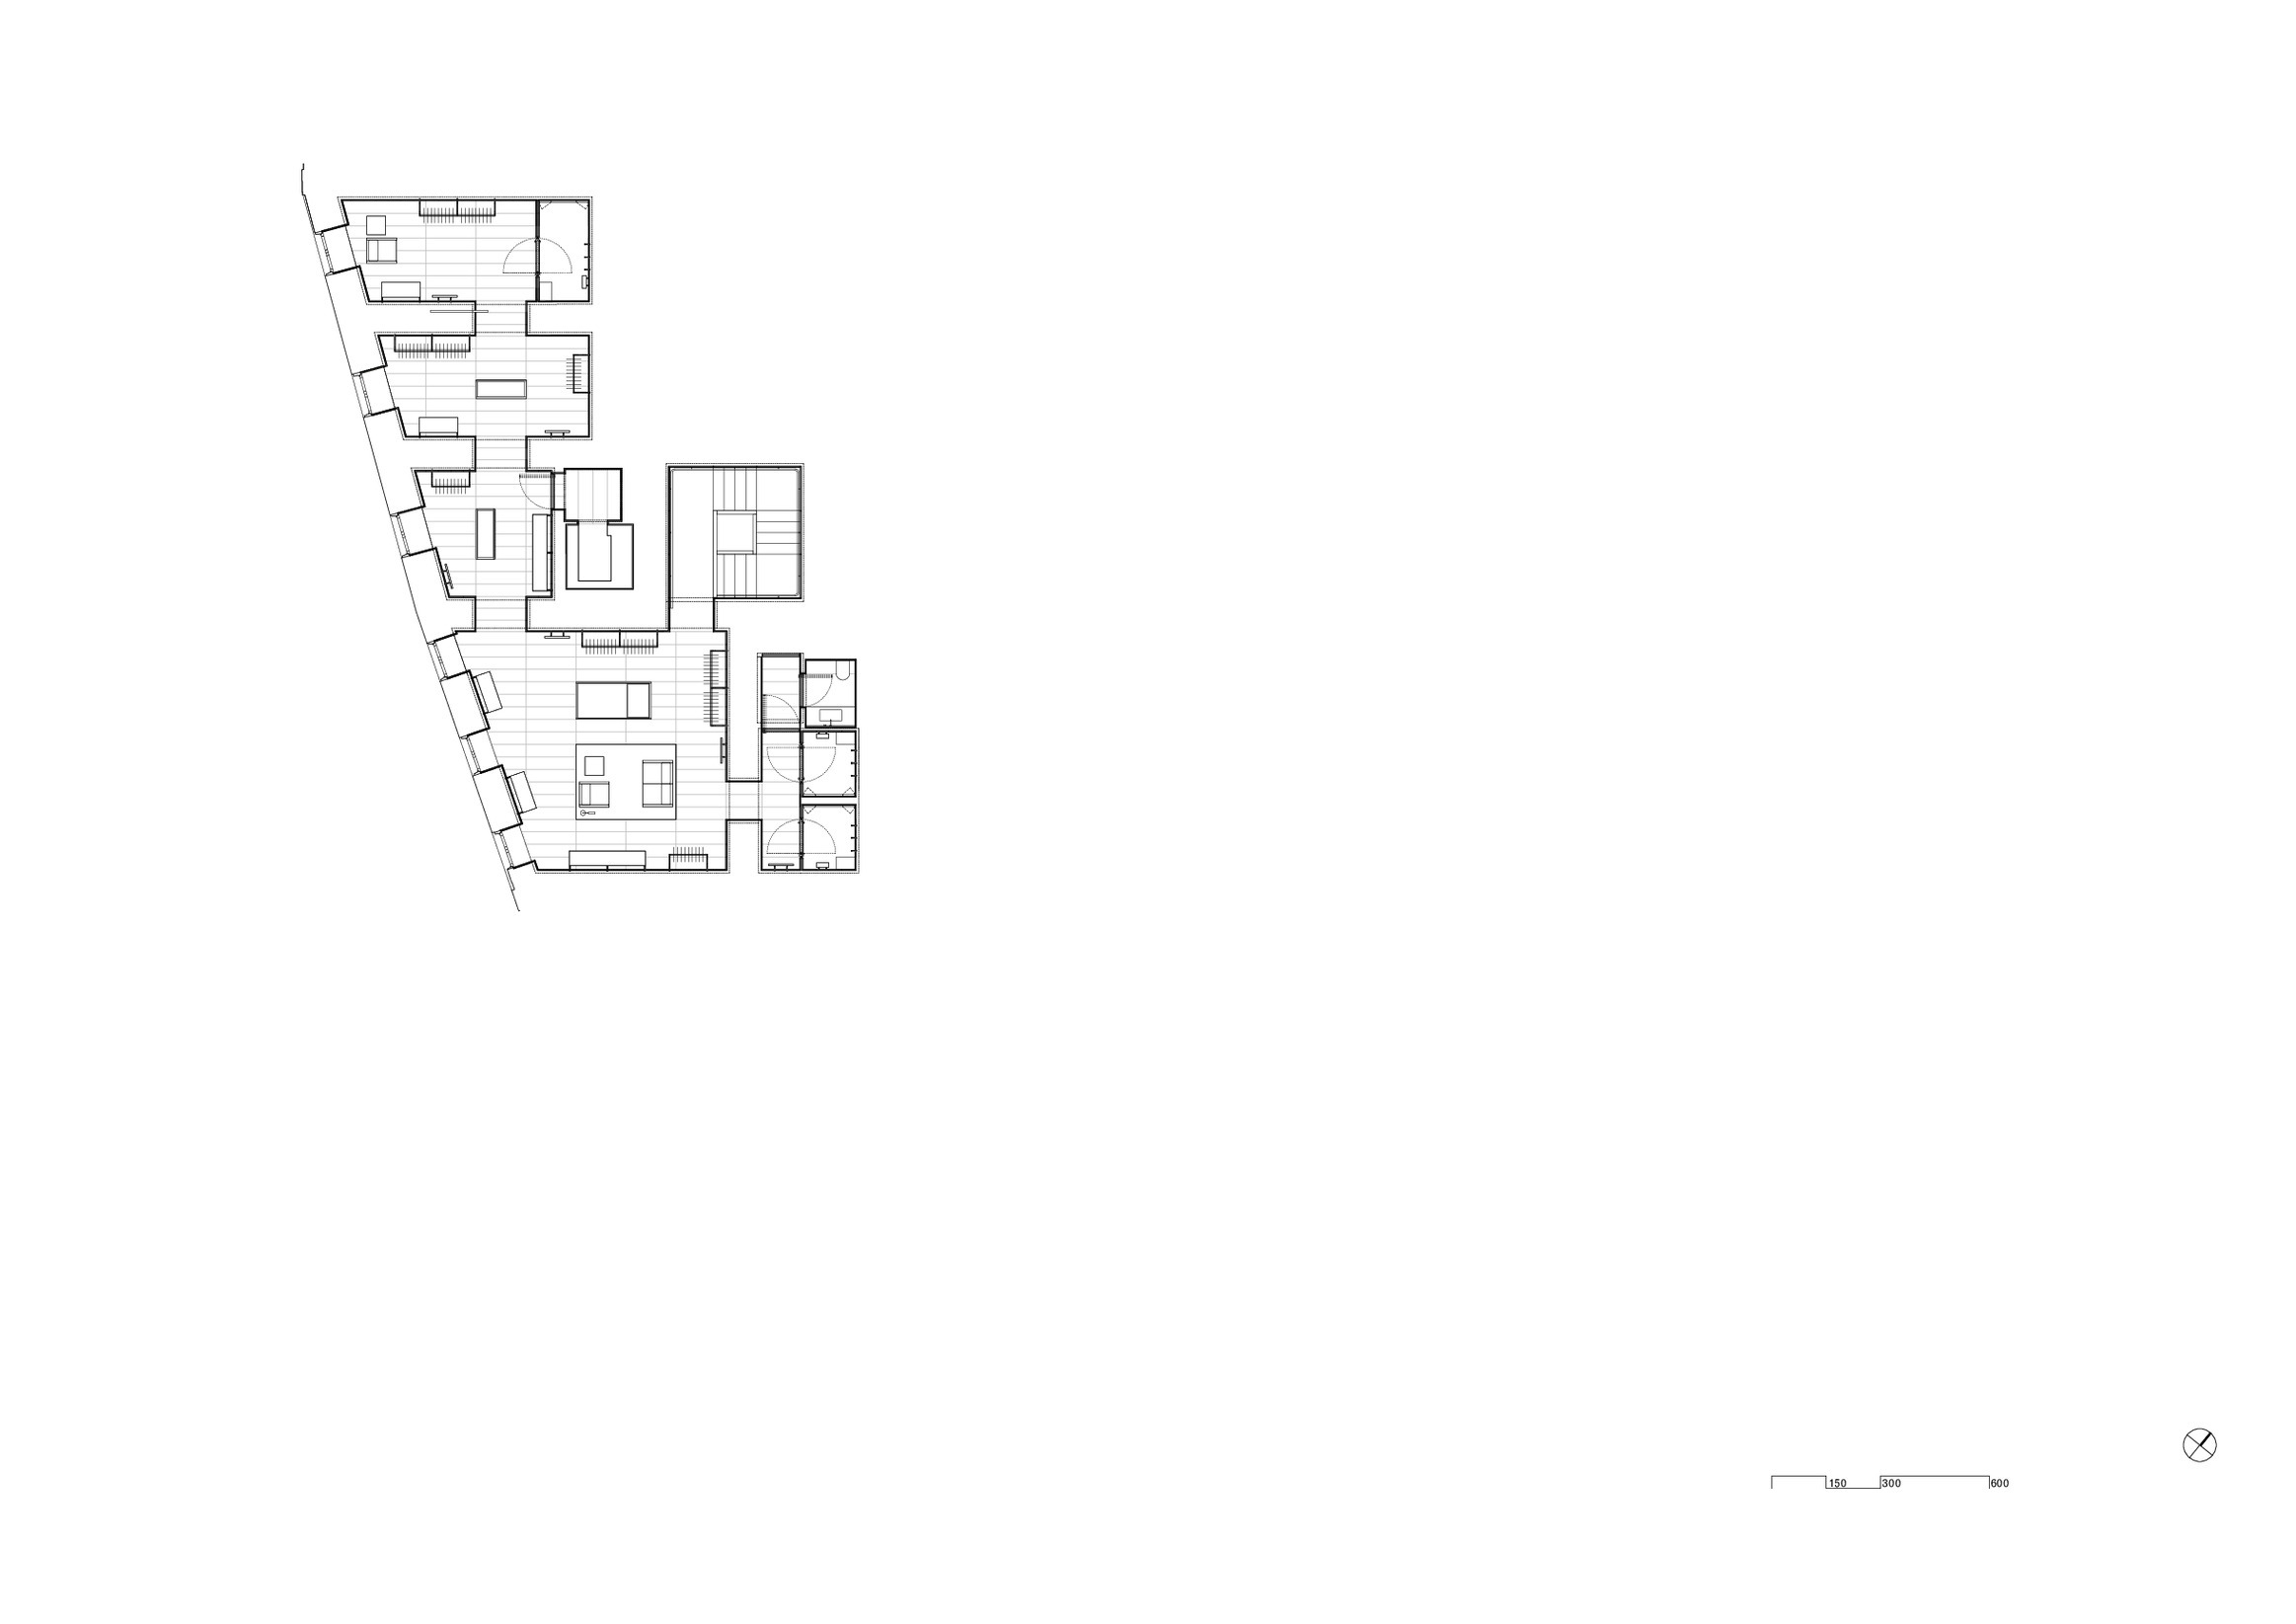 Valentino Flagship Store in Rome, Piazza di Spagna, second floor plan.